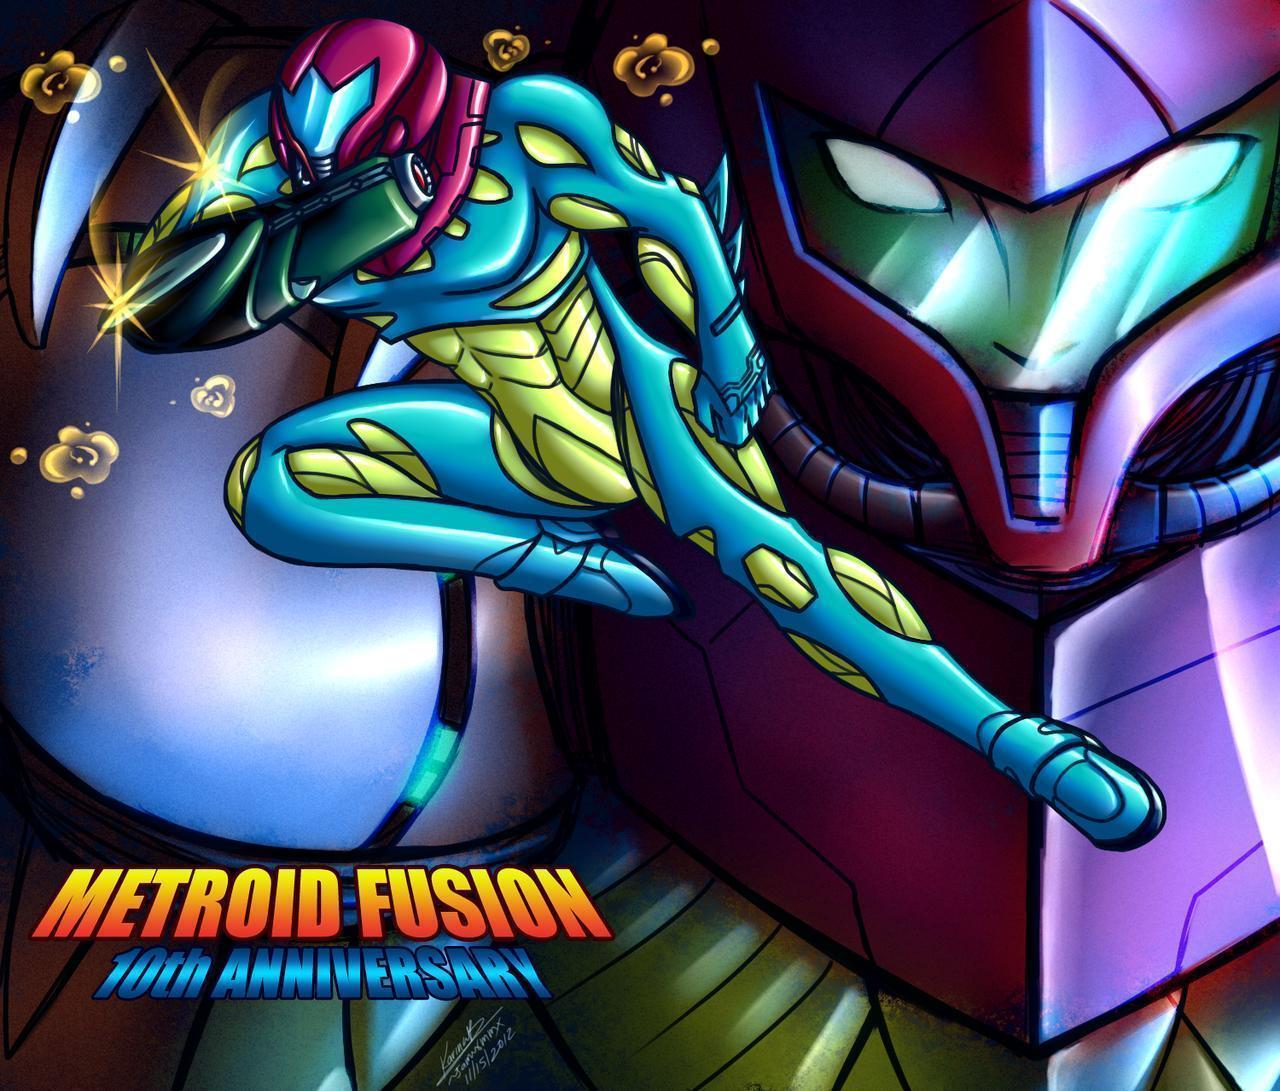 image For > Metroid Fusion Wallpaper